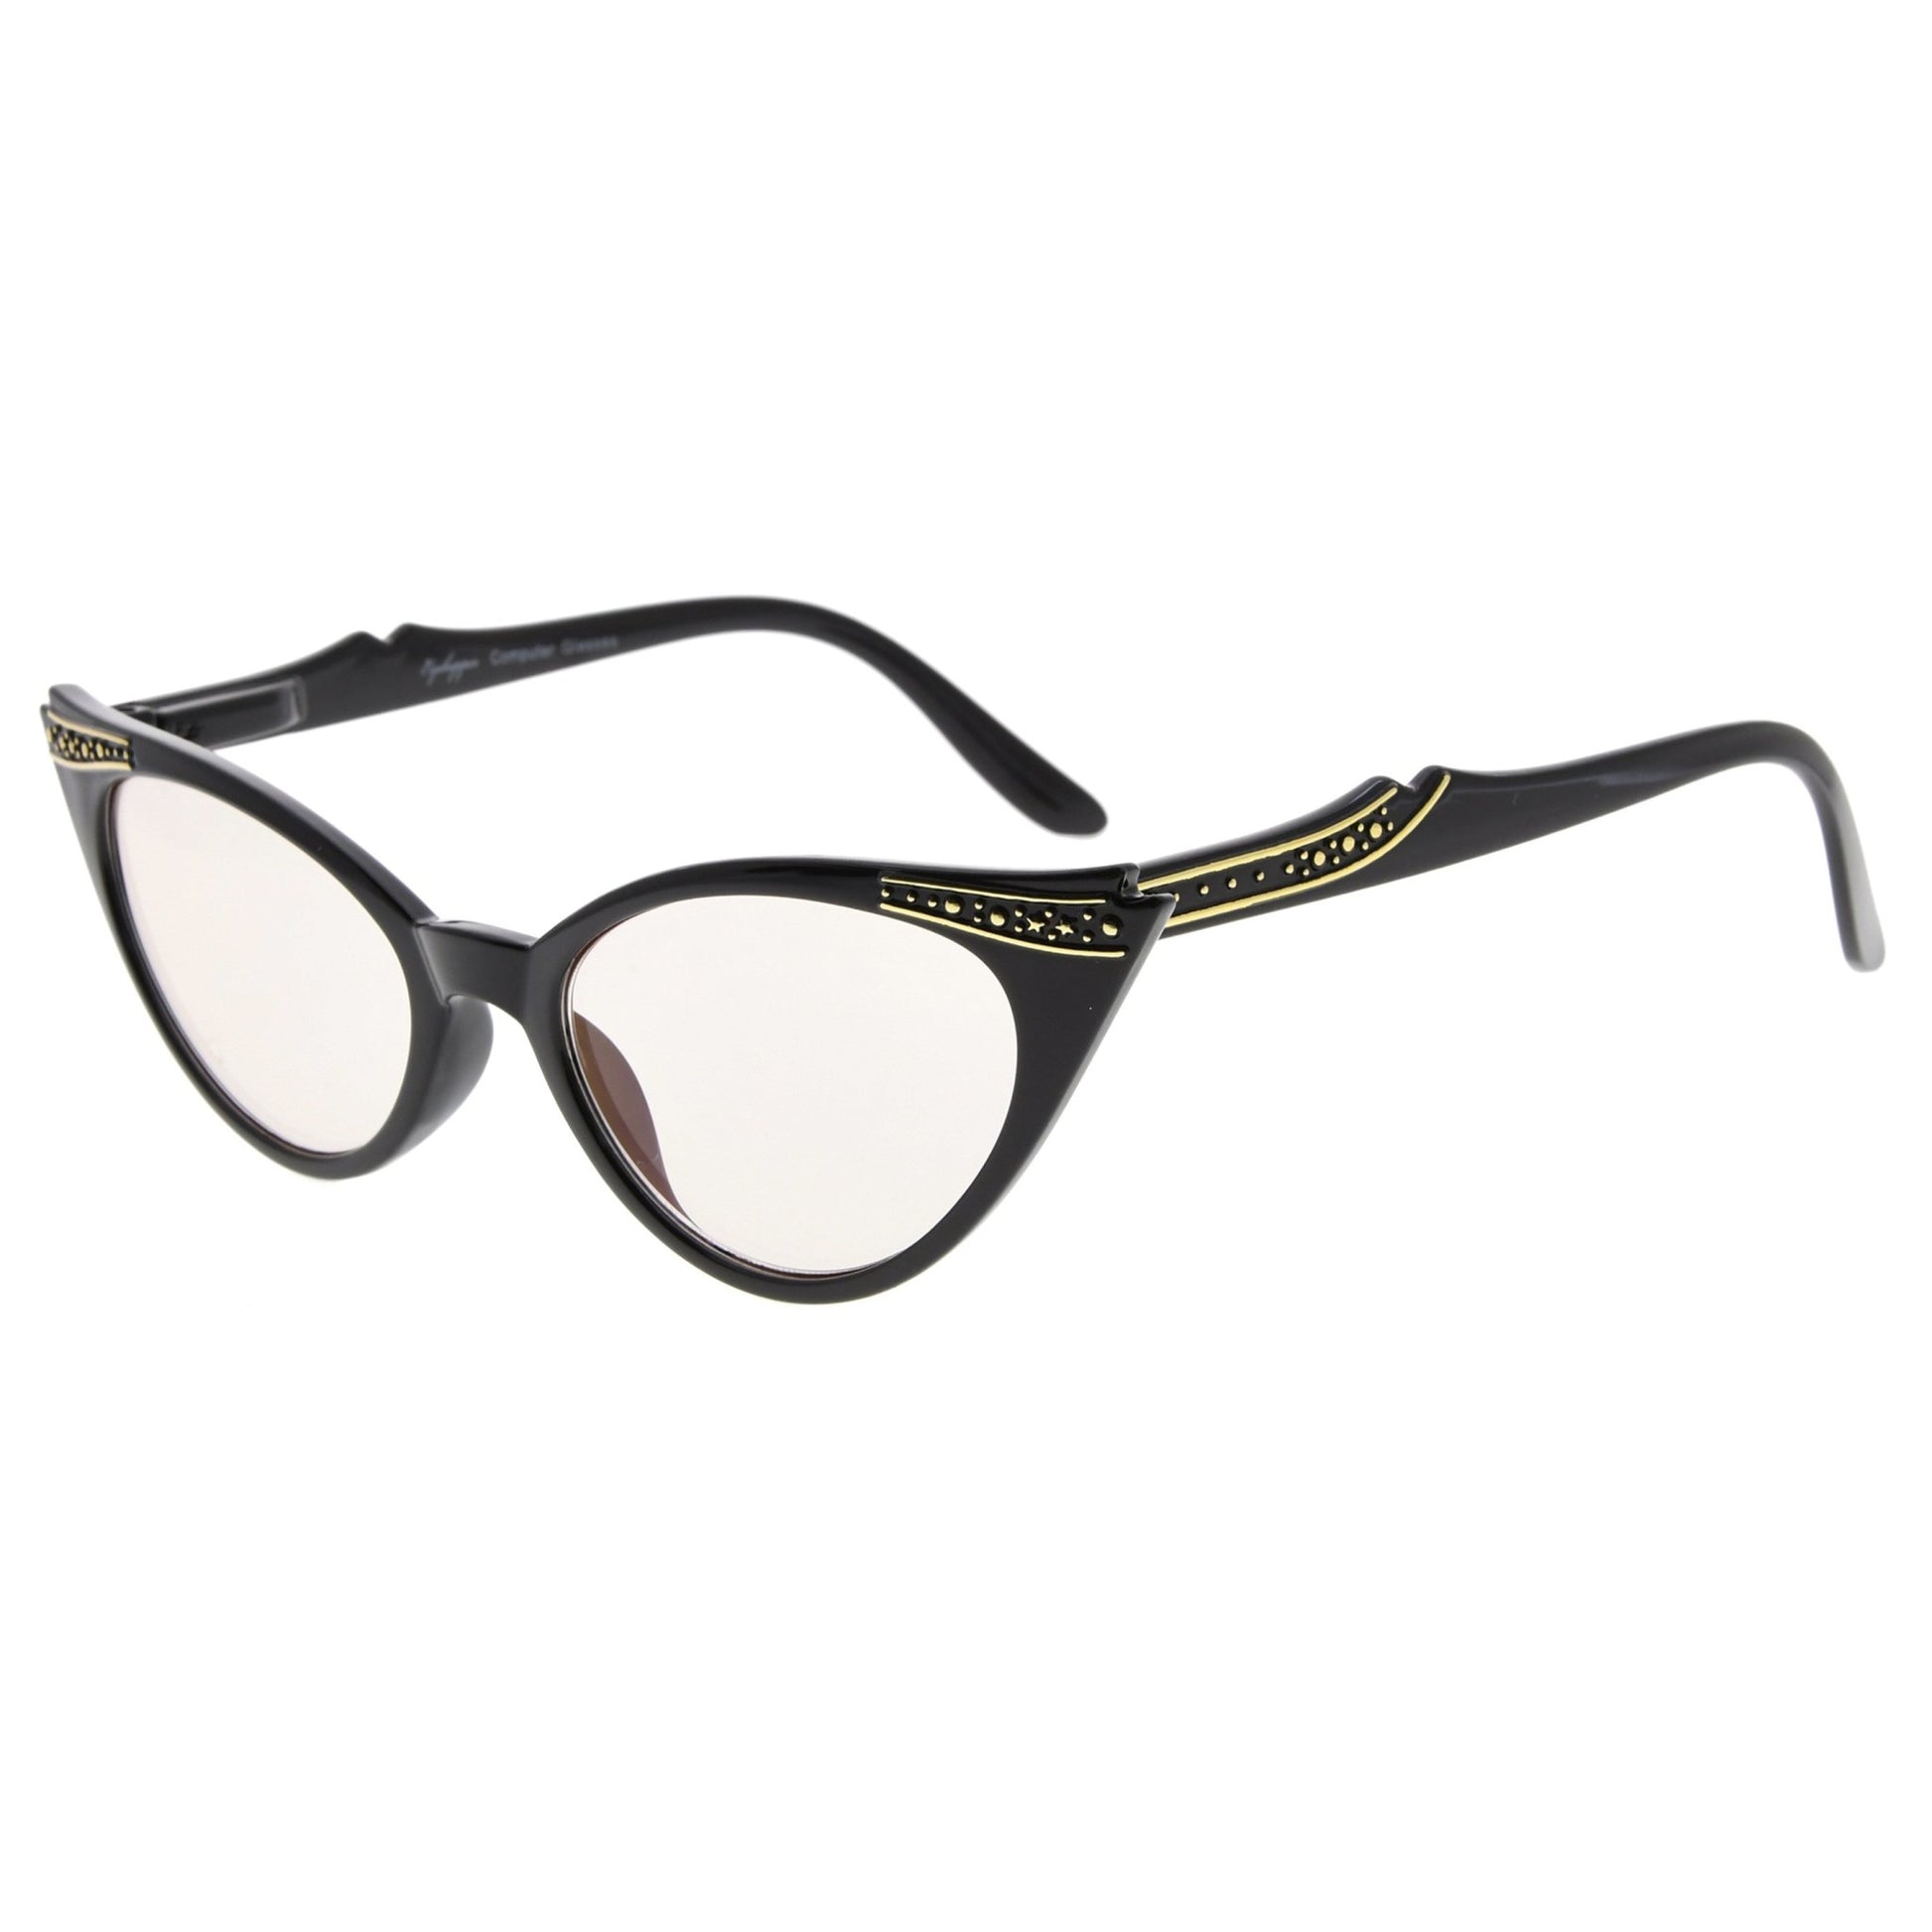 Cateyes Computer Reading Glasses CG914